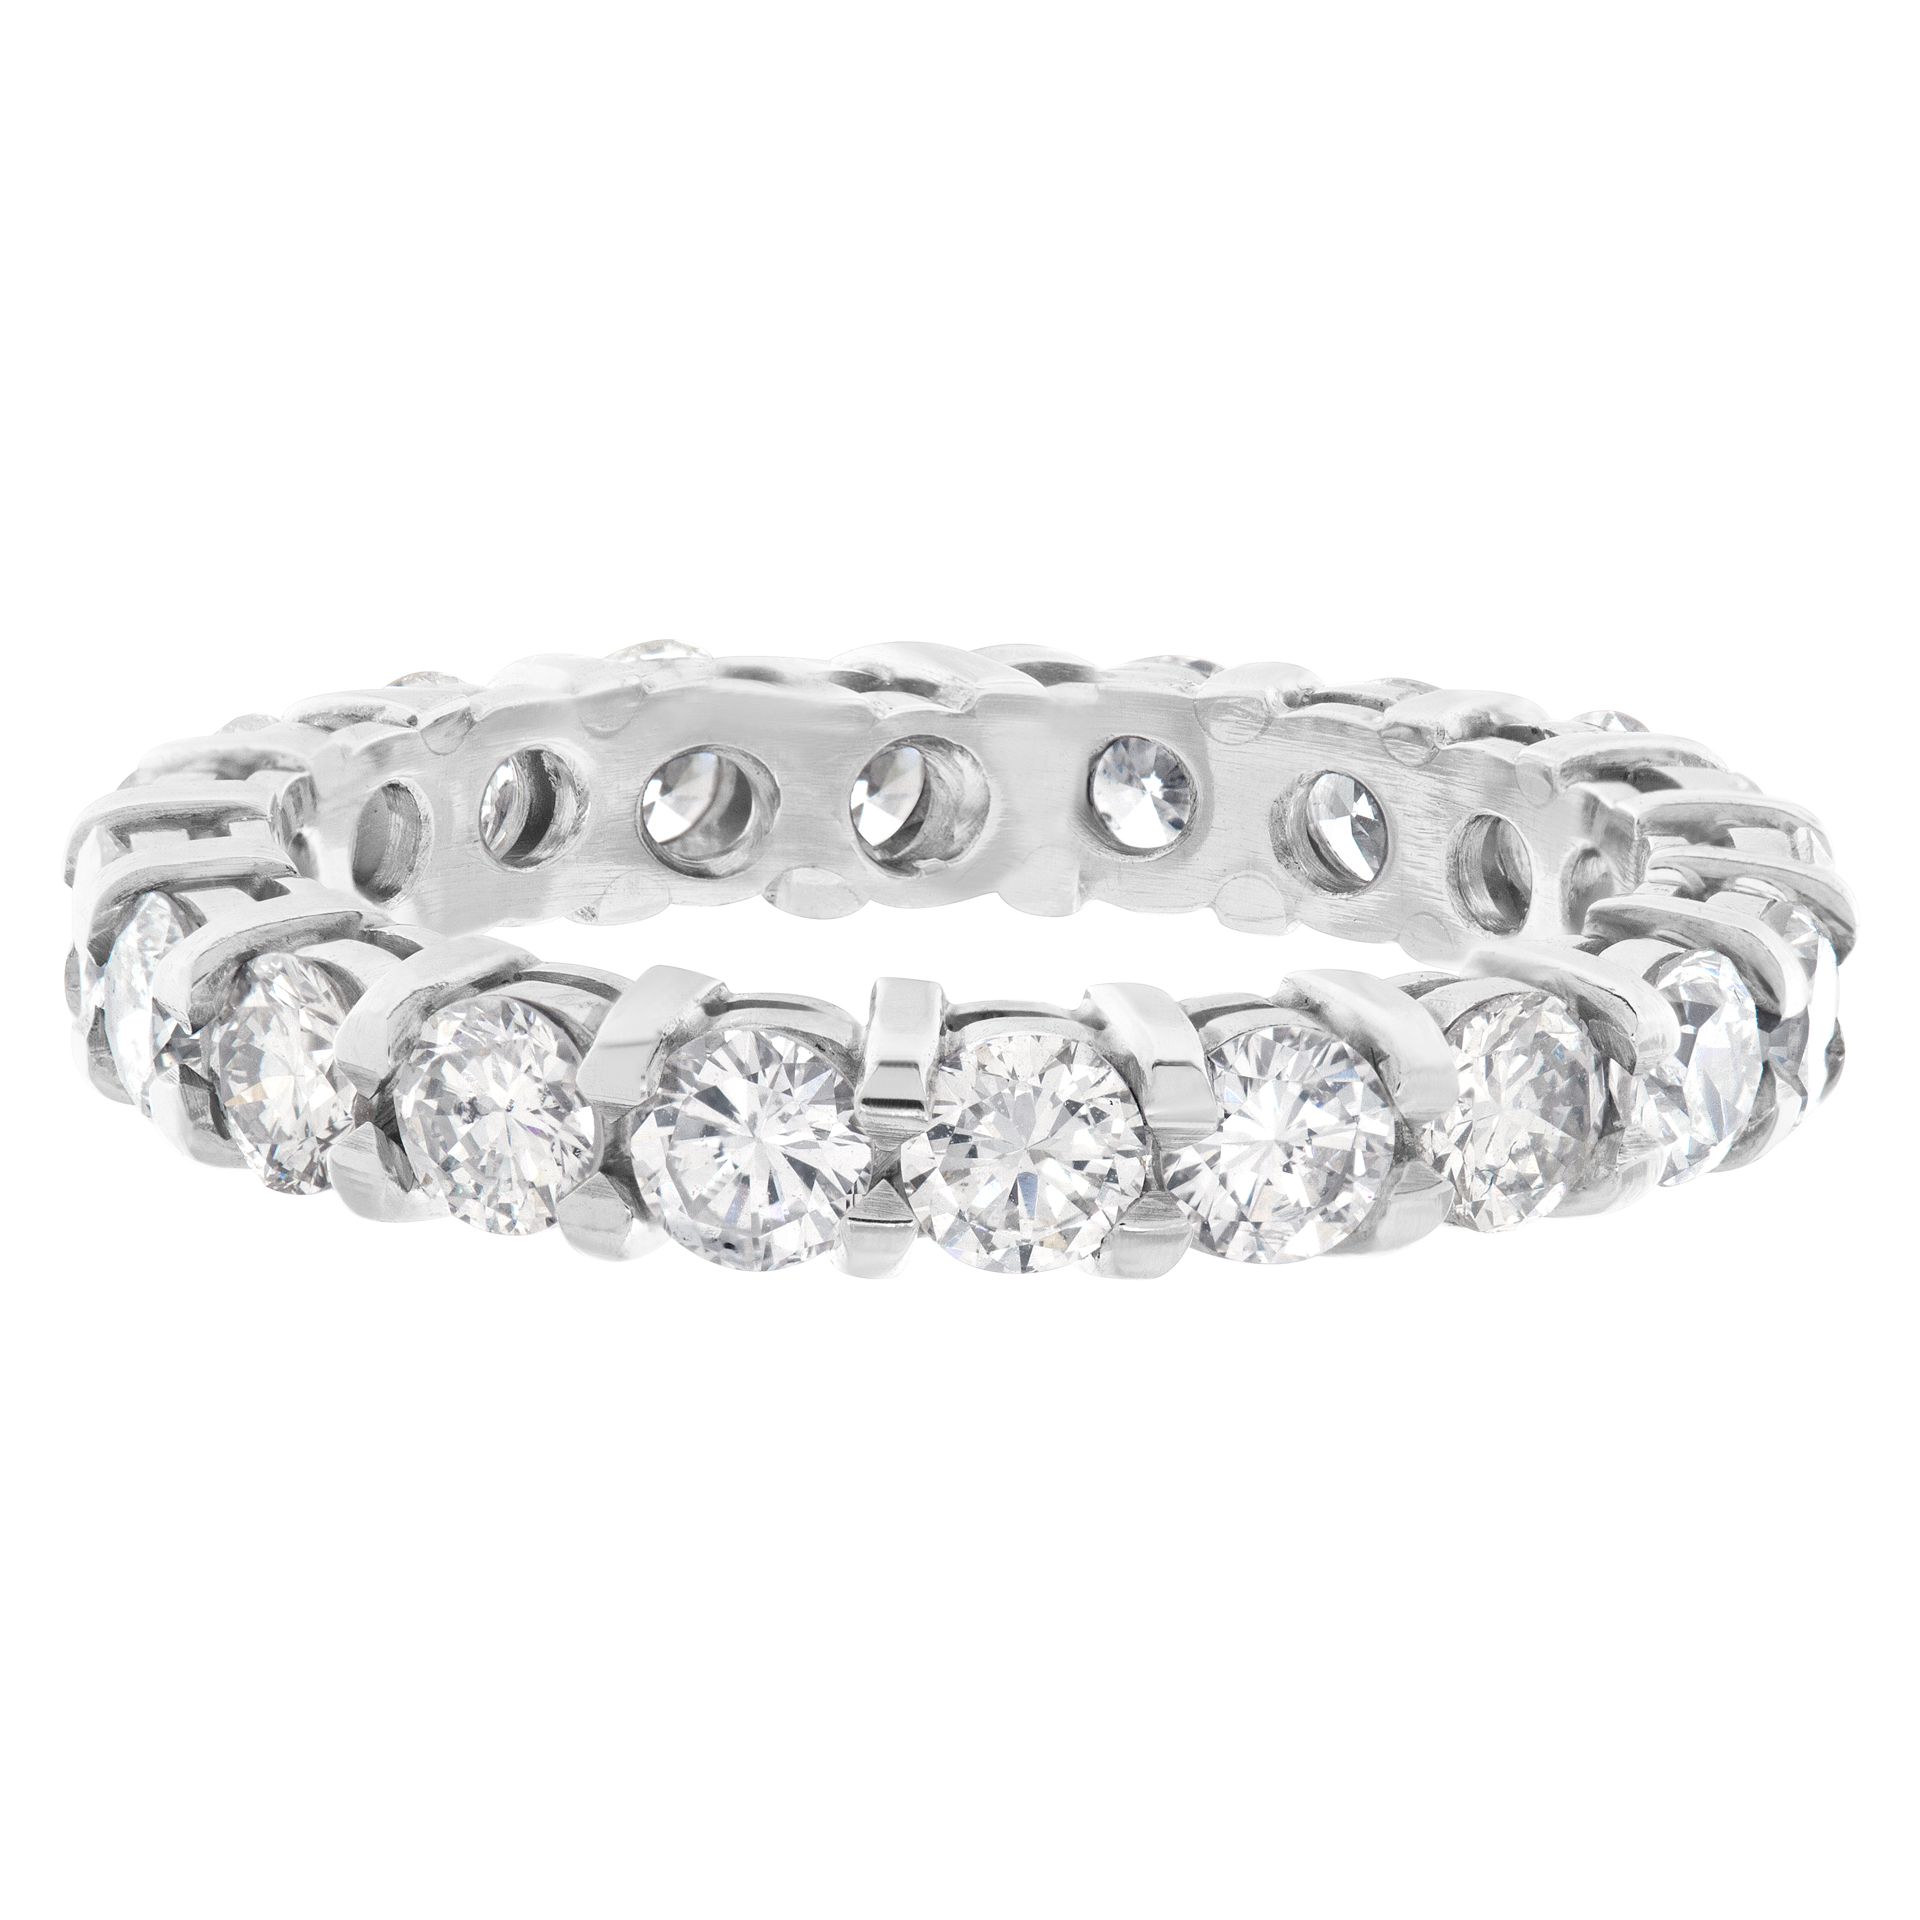 Diamond Eternity Band and Ring with 1.95 carats in diamonds set in platinum (Stones)